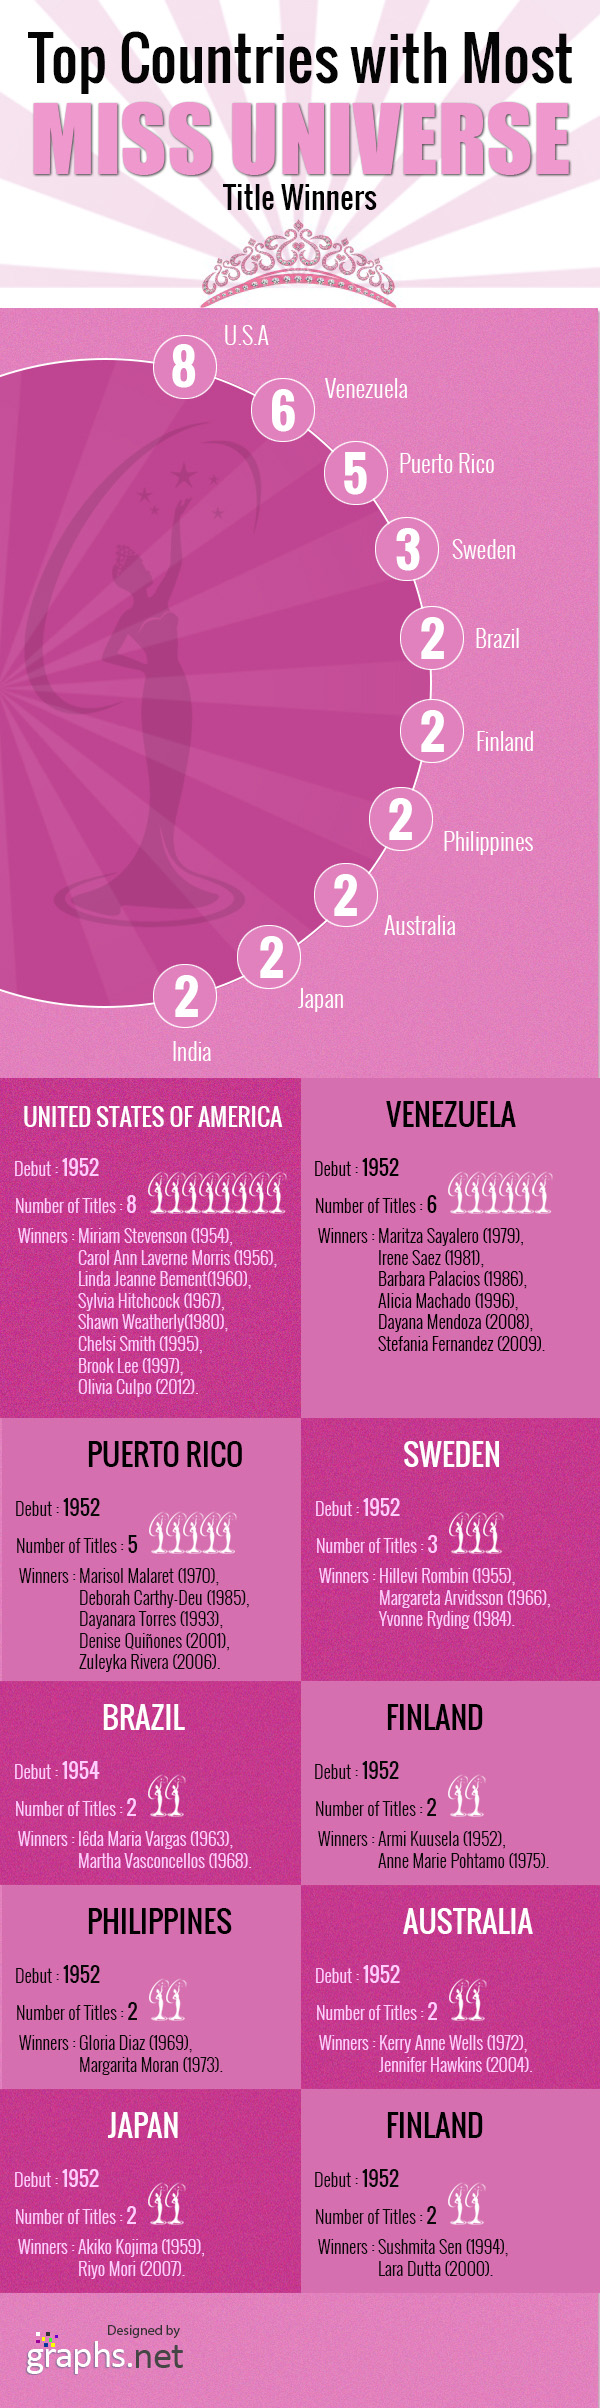 Top Countries with Most Miss Universe Title Winners